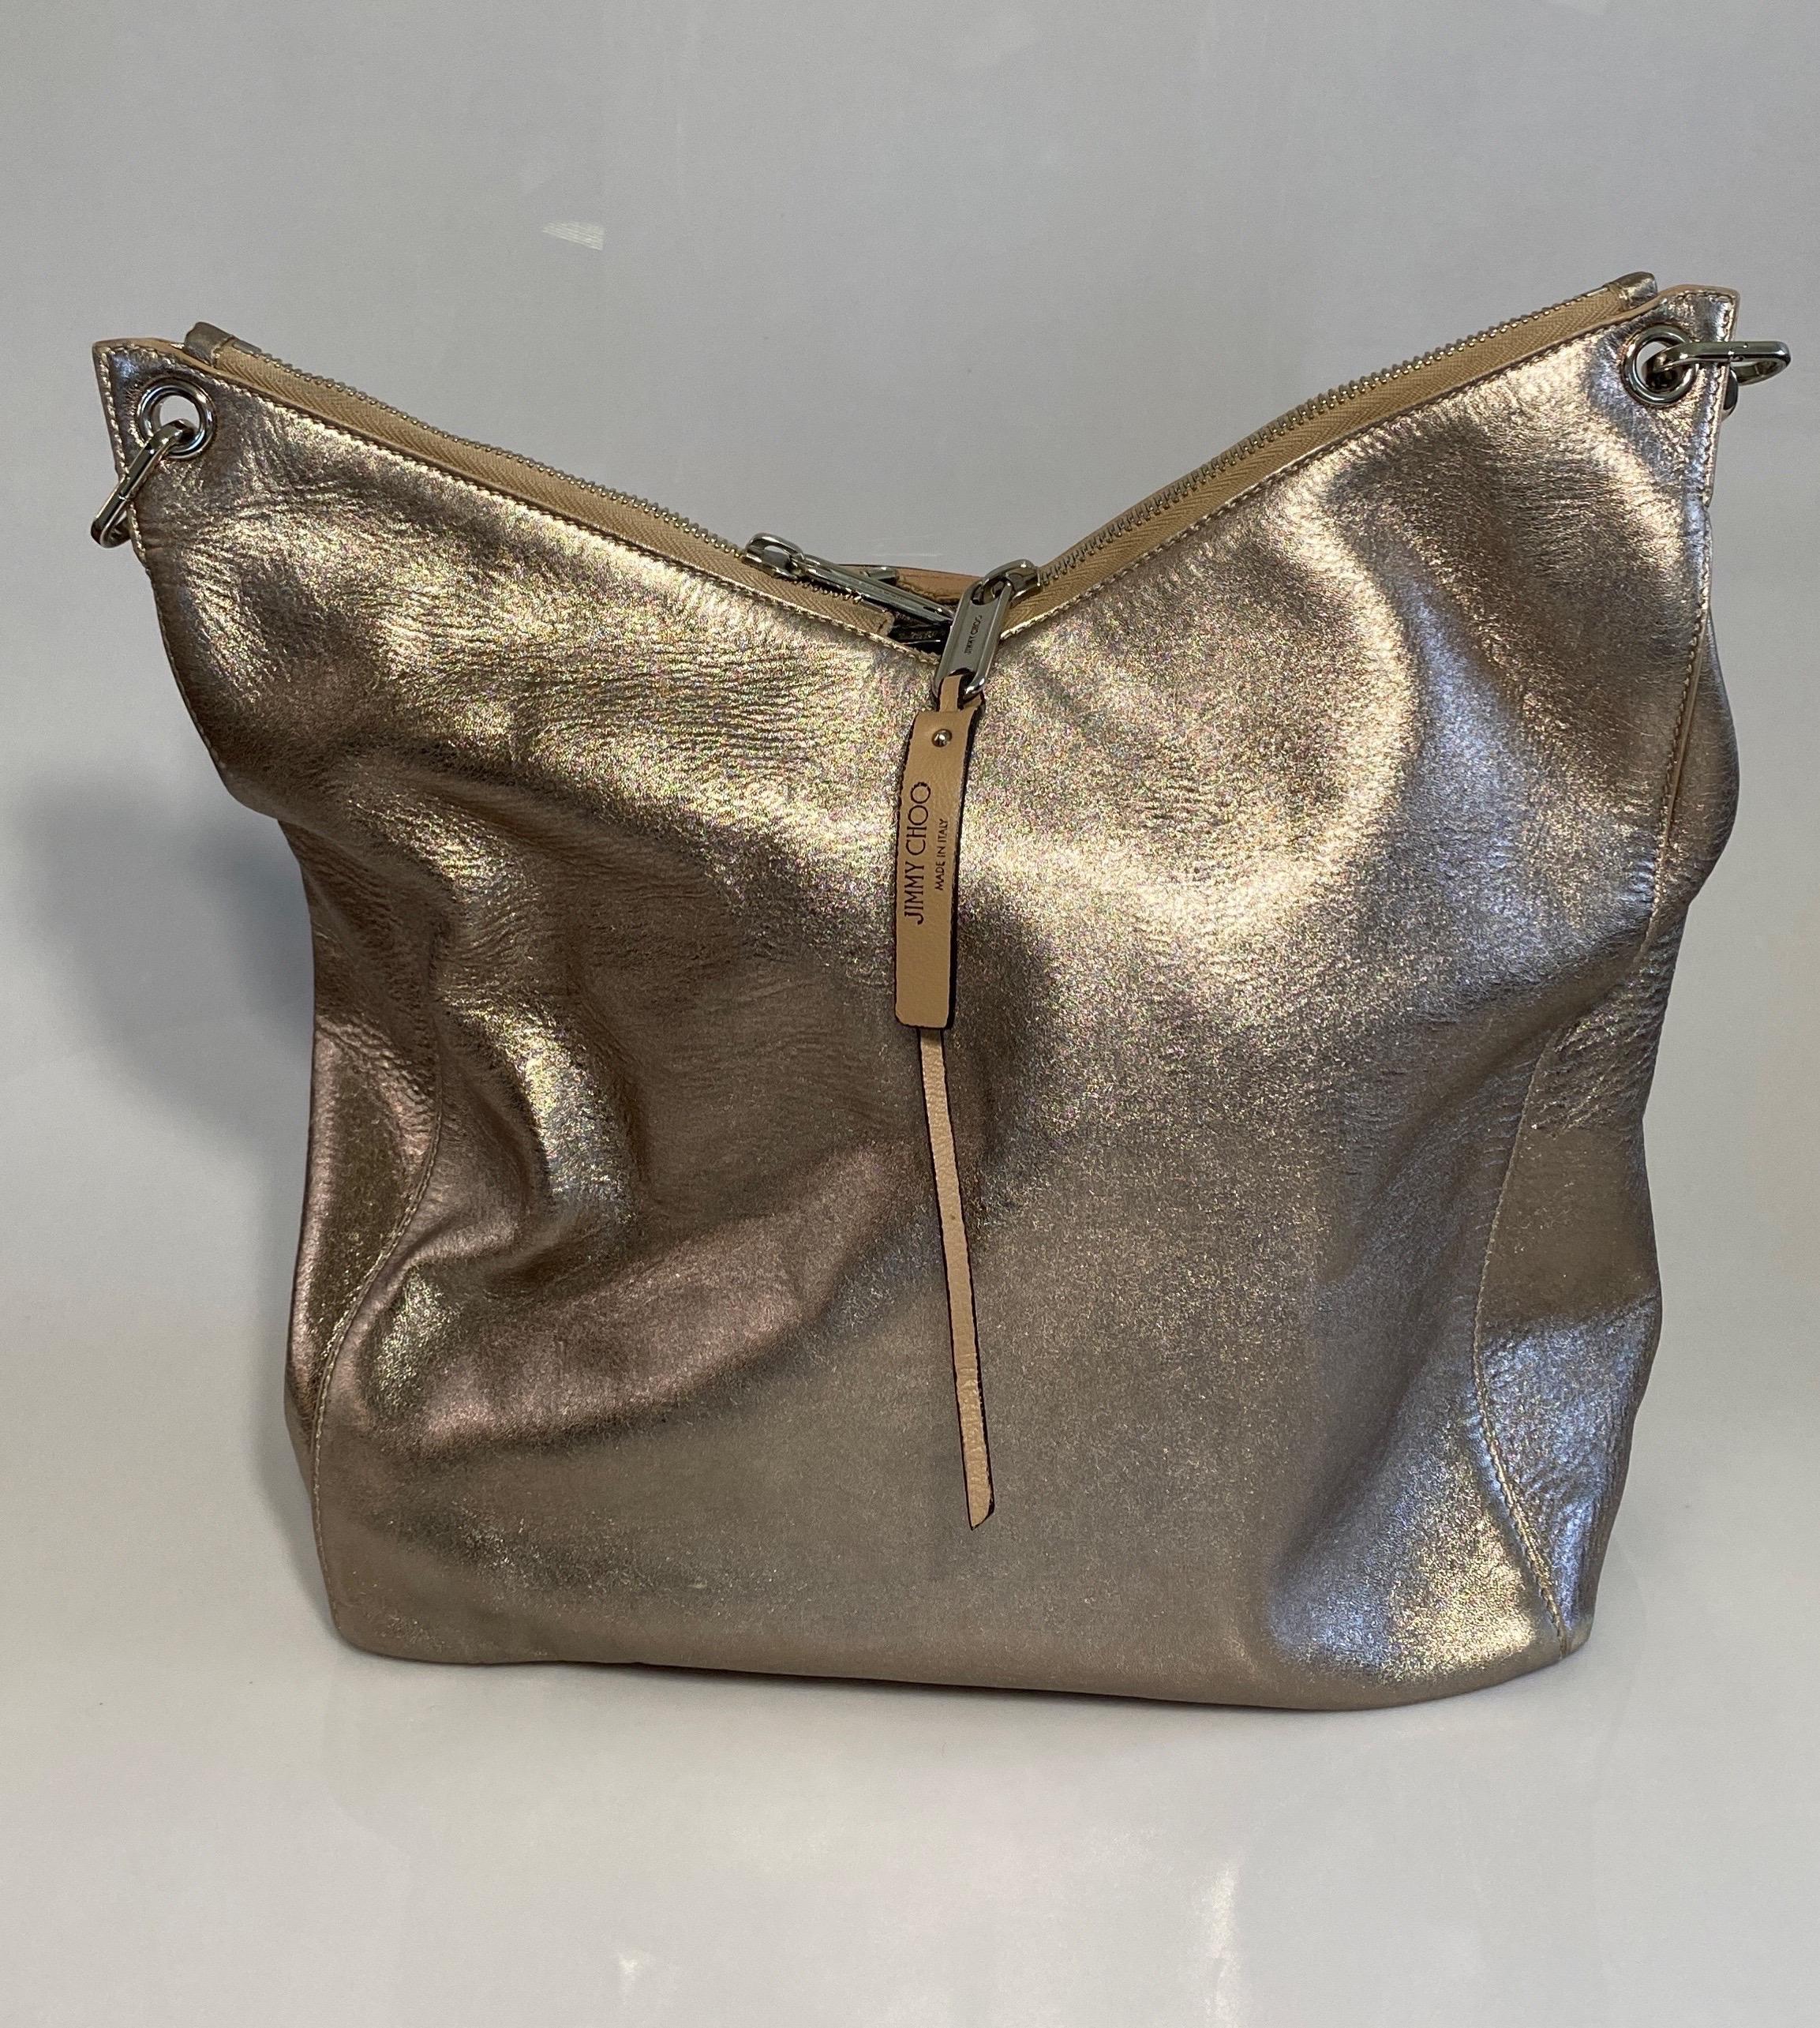 Jimmy Choo Metallic Large Hobo Tote has a bronze/gold tone to it. The leather has that distressed look to it. The top of the bag has a V Shaped dual zip closure with a hanging leather Jimmy Choo accessory detail. It has a Silver large link and